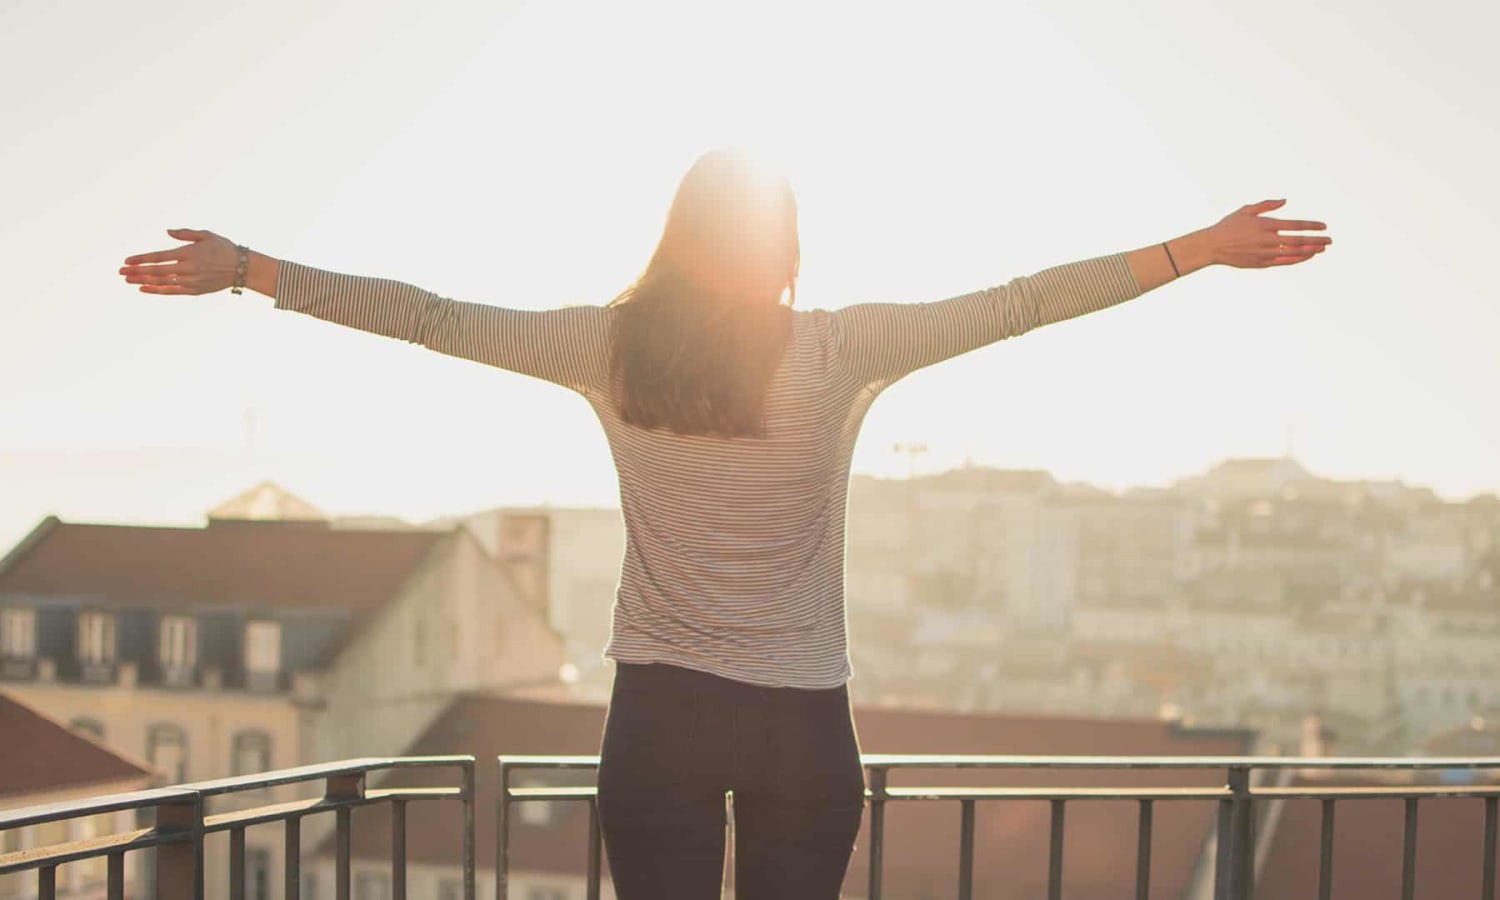 16+ Inspiring Quotes About Following Your Dreams - Resilient